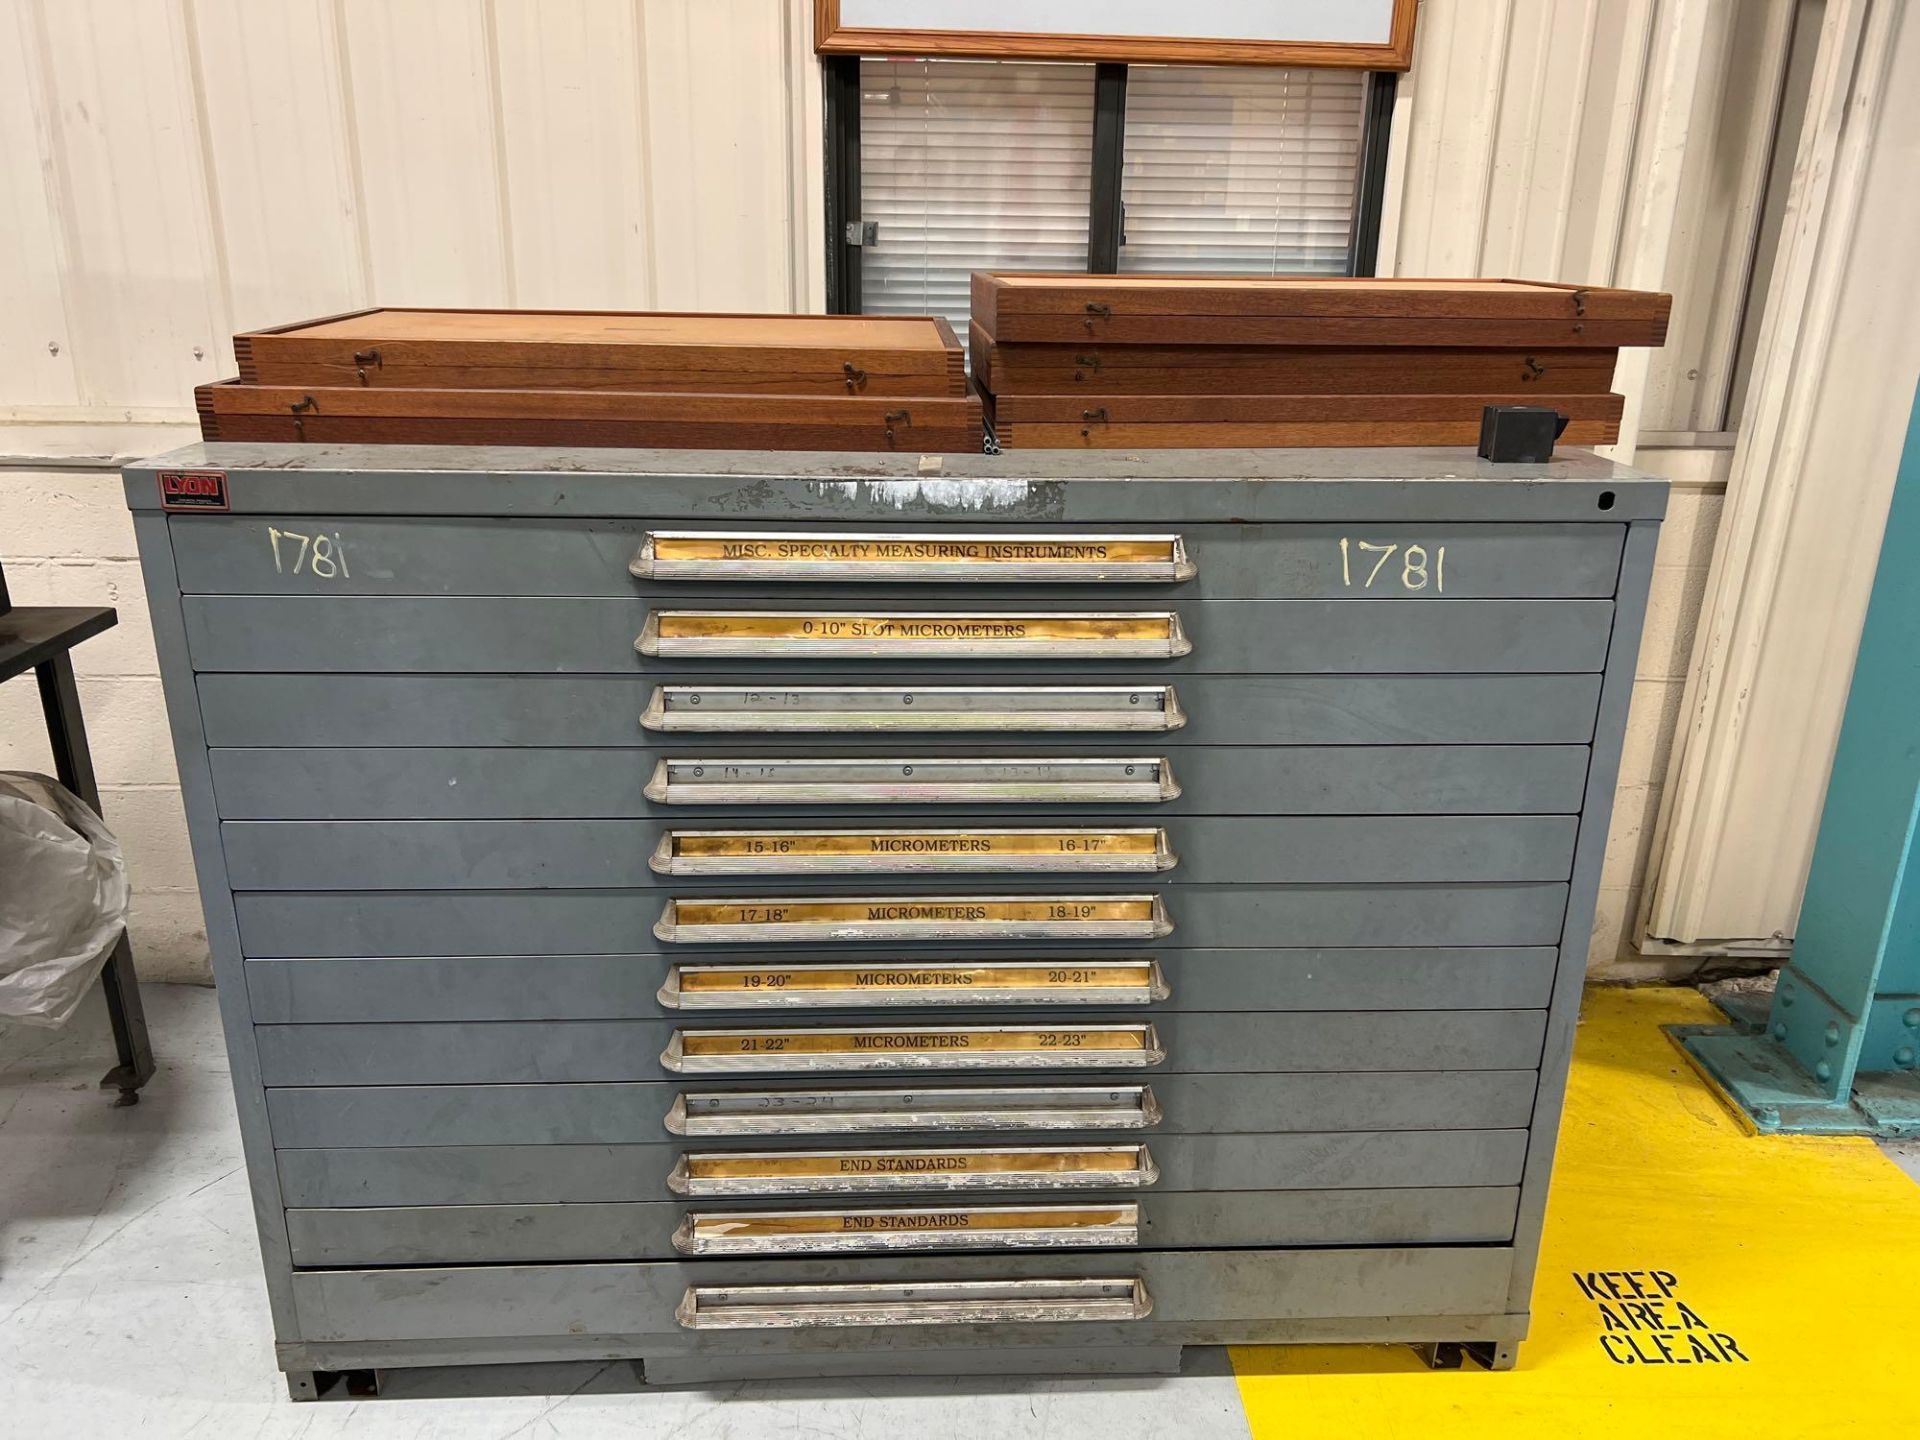 12 DRAWER LYON Cabinet with Micrometers and Standards